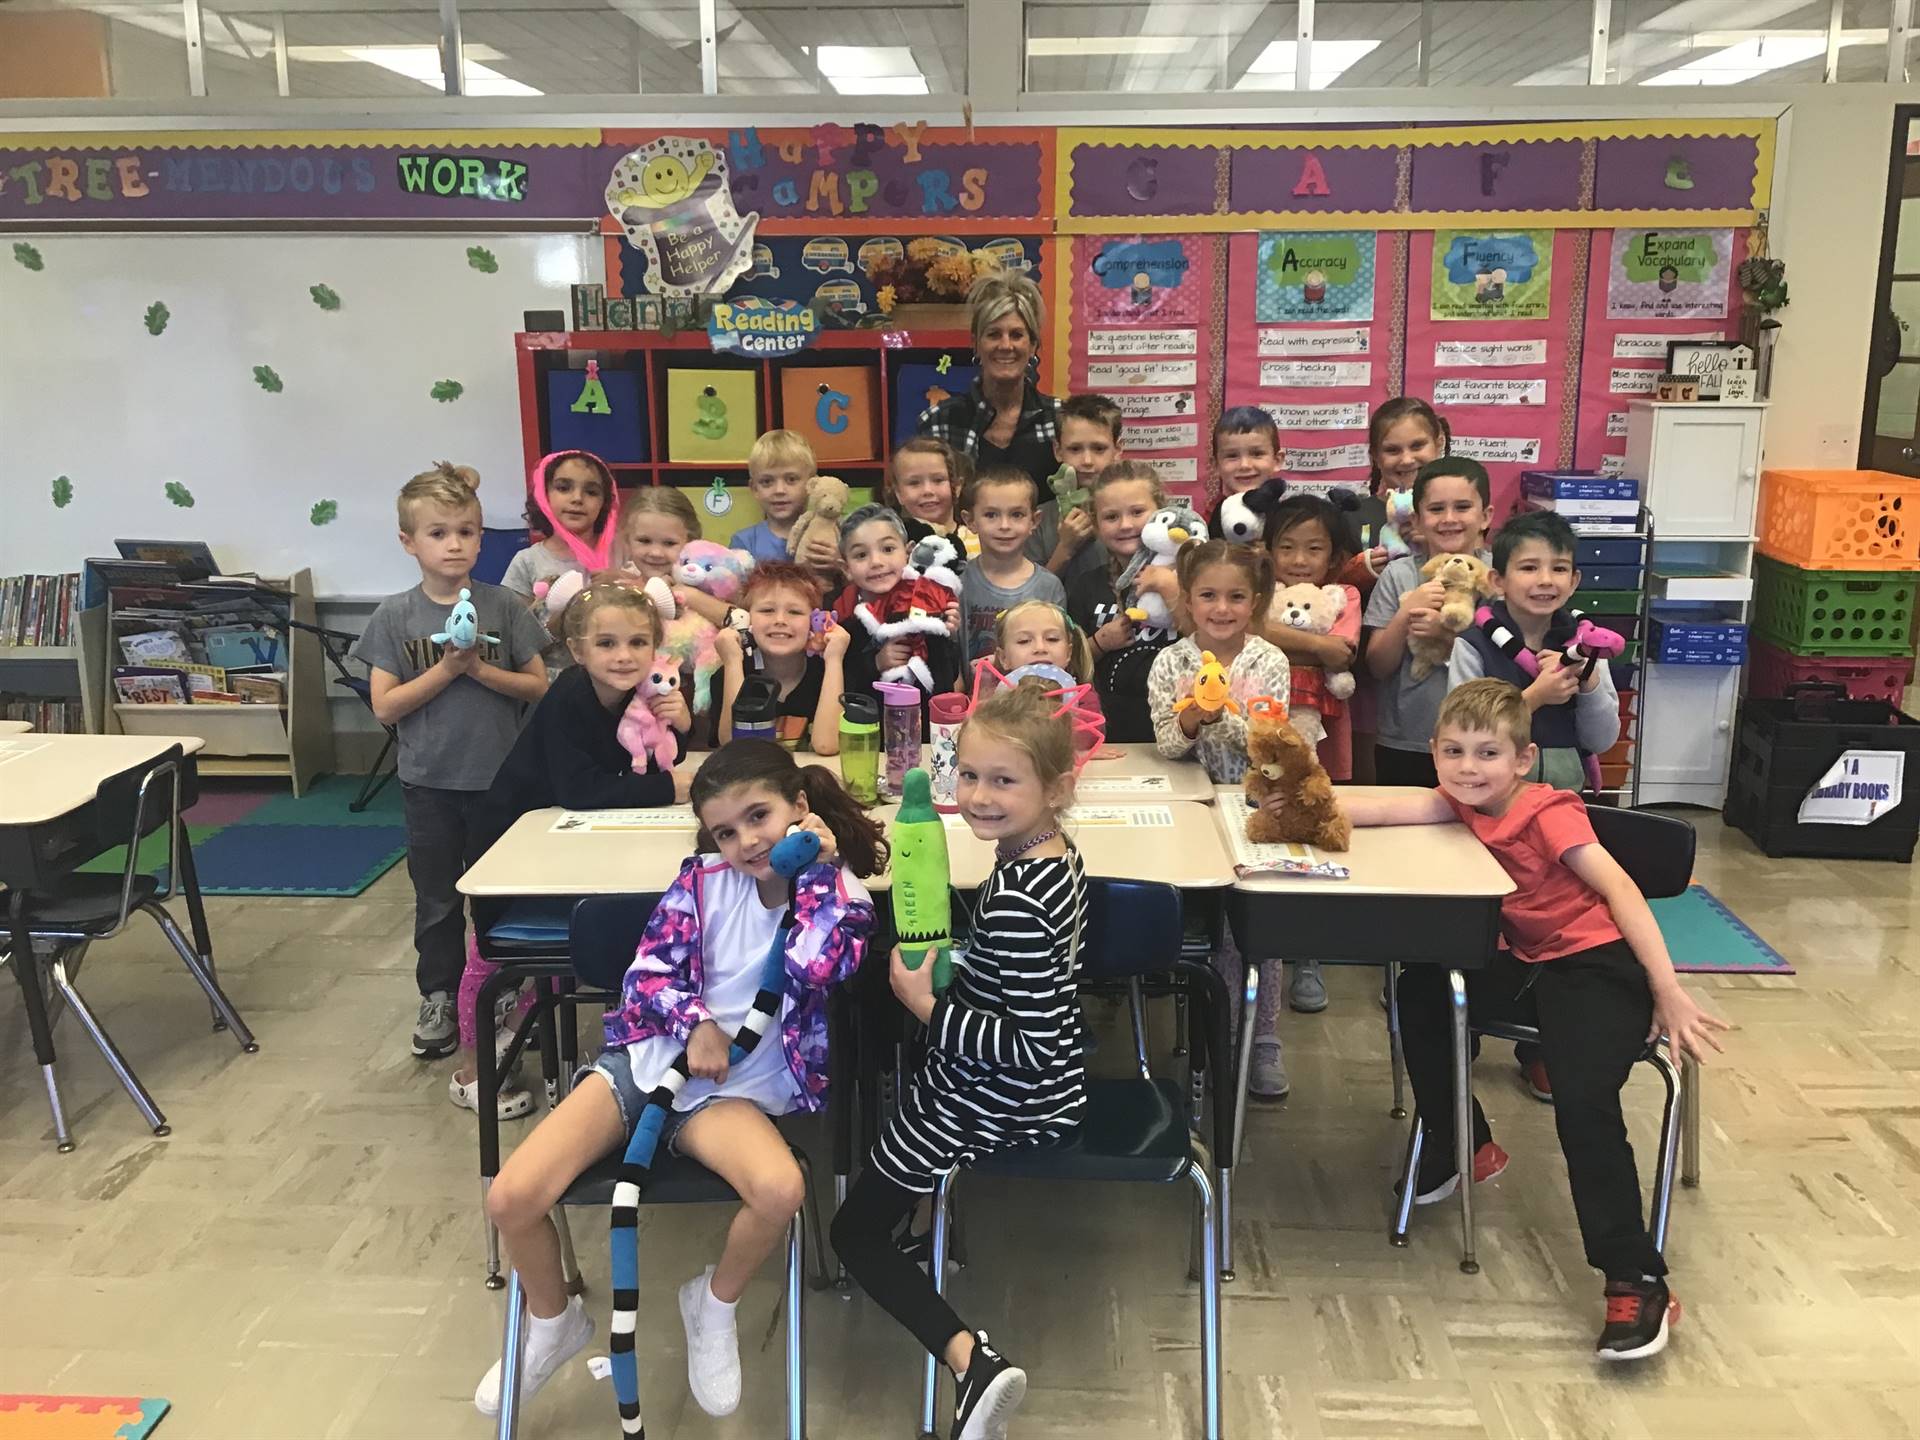 Mrs. Henne's 1A class celebrates "Crazy Hair Day"